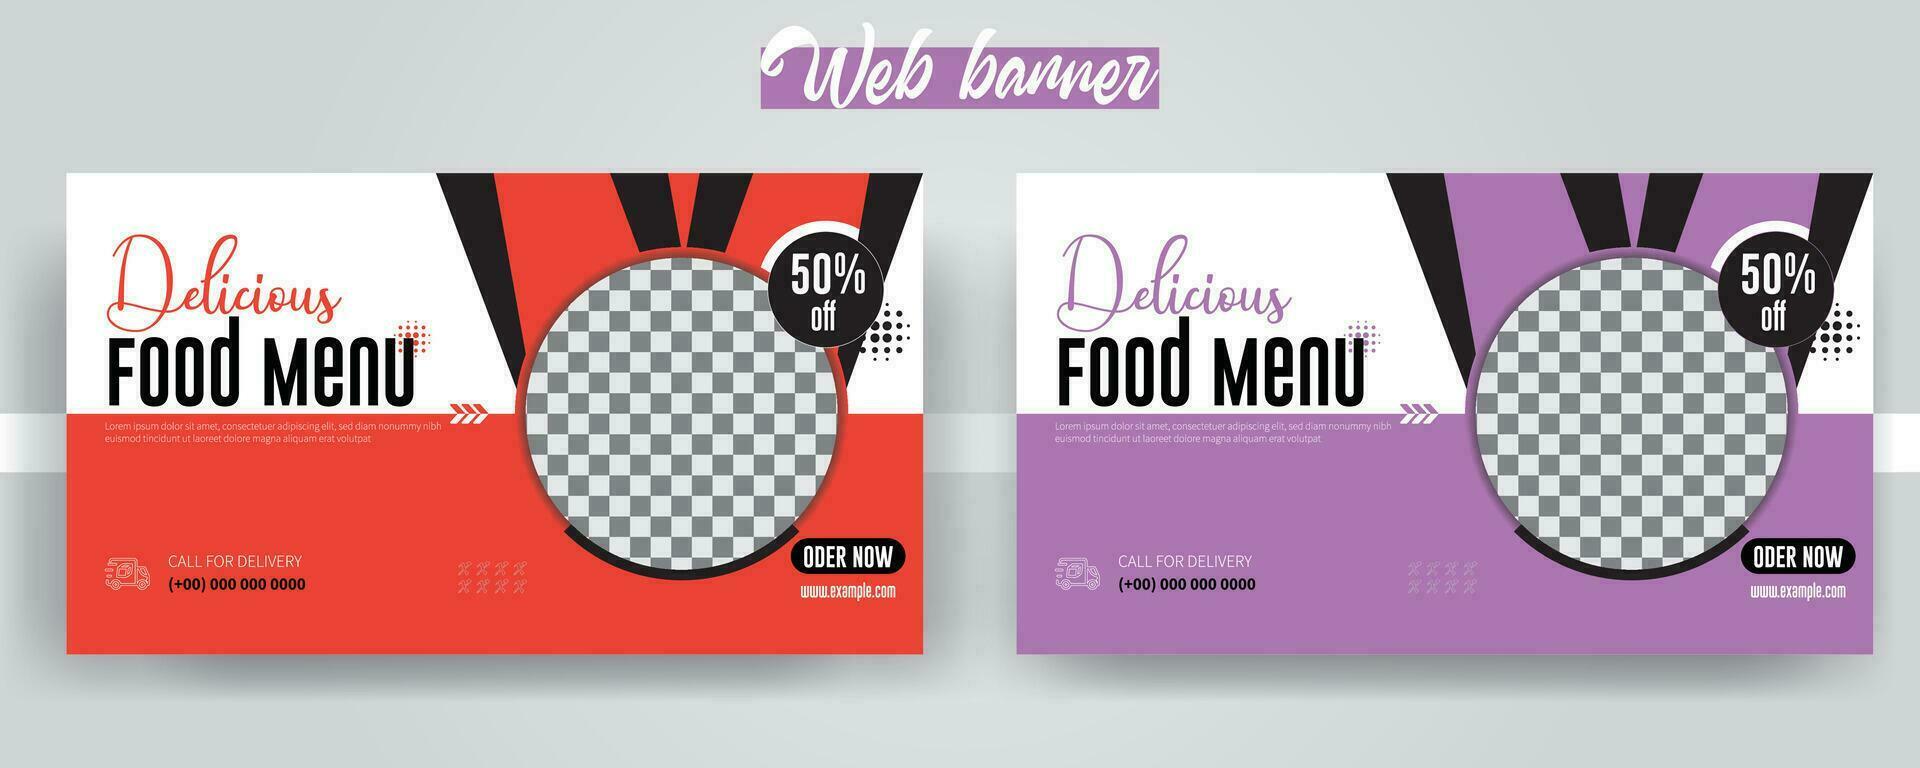 Delicious Food Menu Web banner template design, Fresh Healthy food social media cover template vector with different colors. Restaurant promotion web banner design for digital marketing.